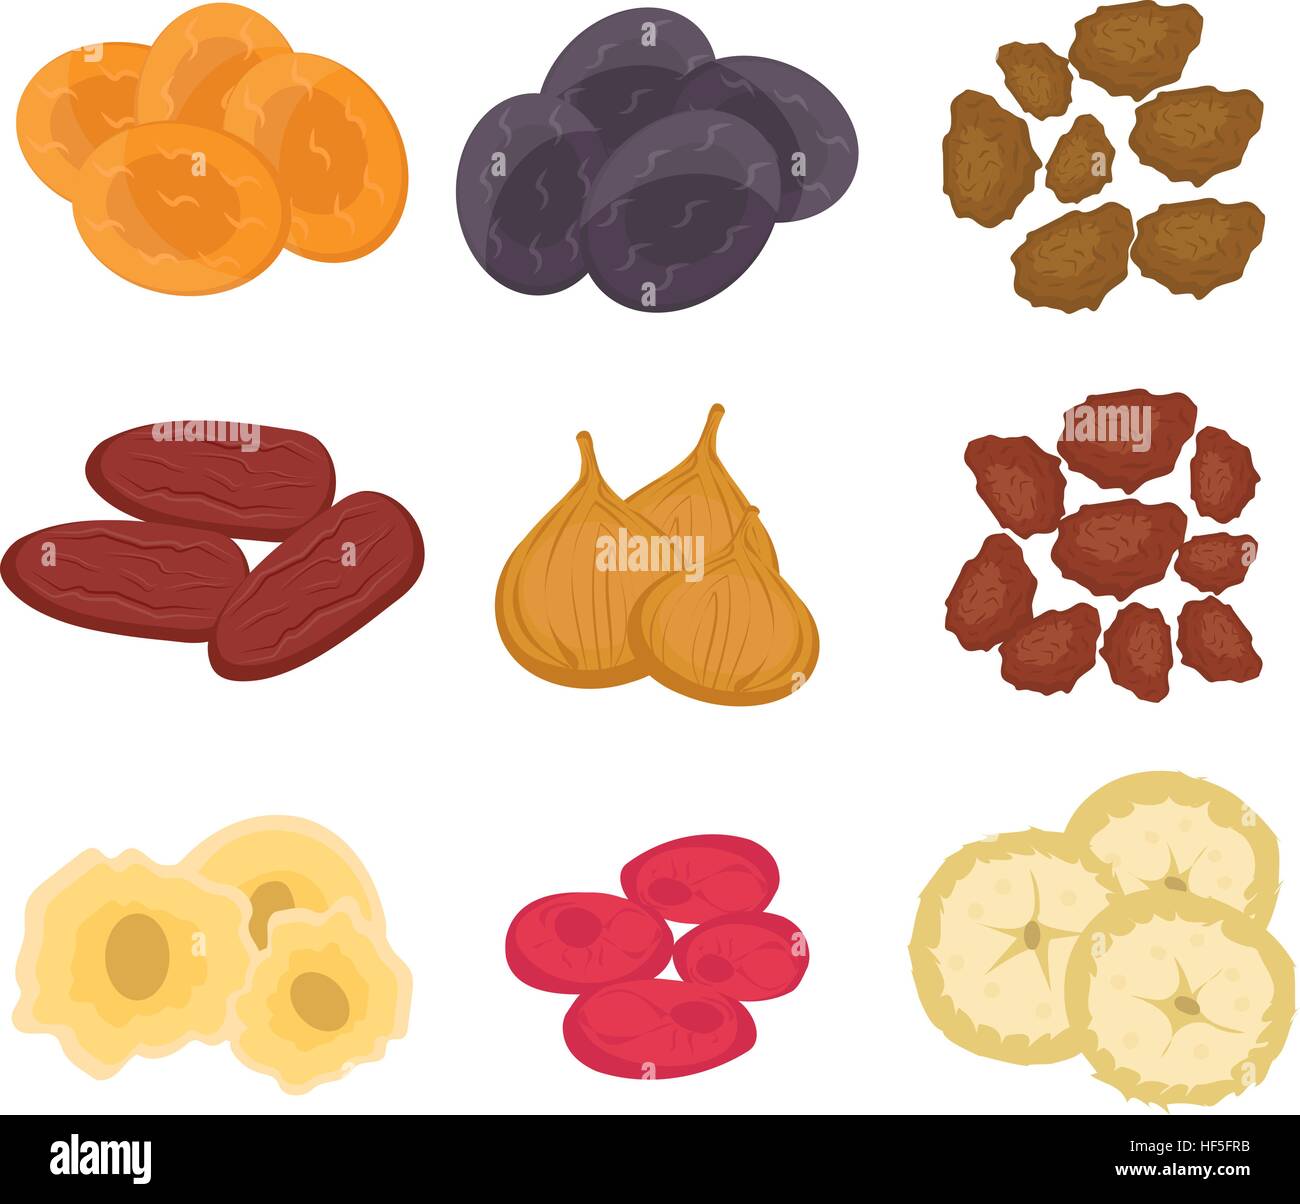 Dry fruits isolated Stock Vector Images - Alamy